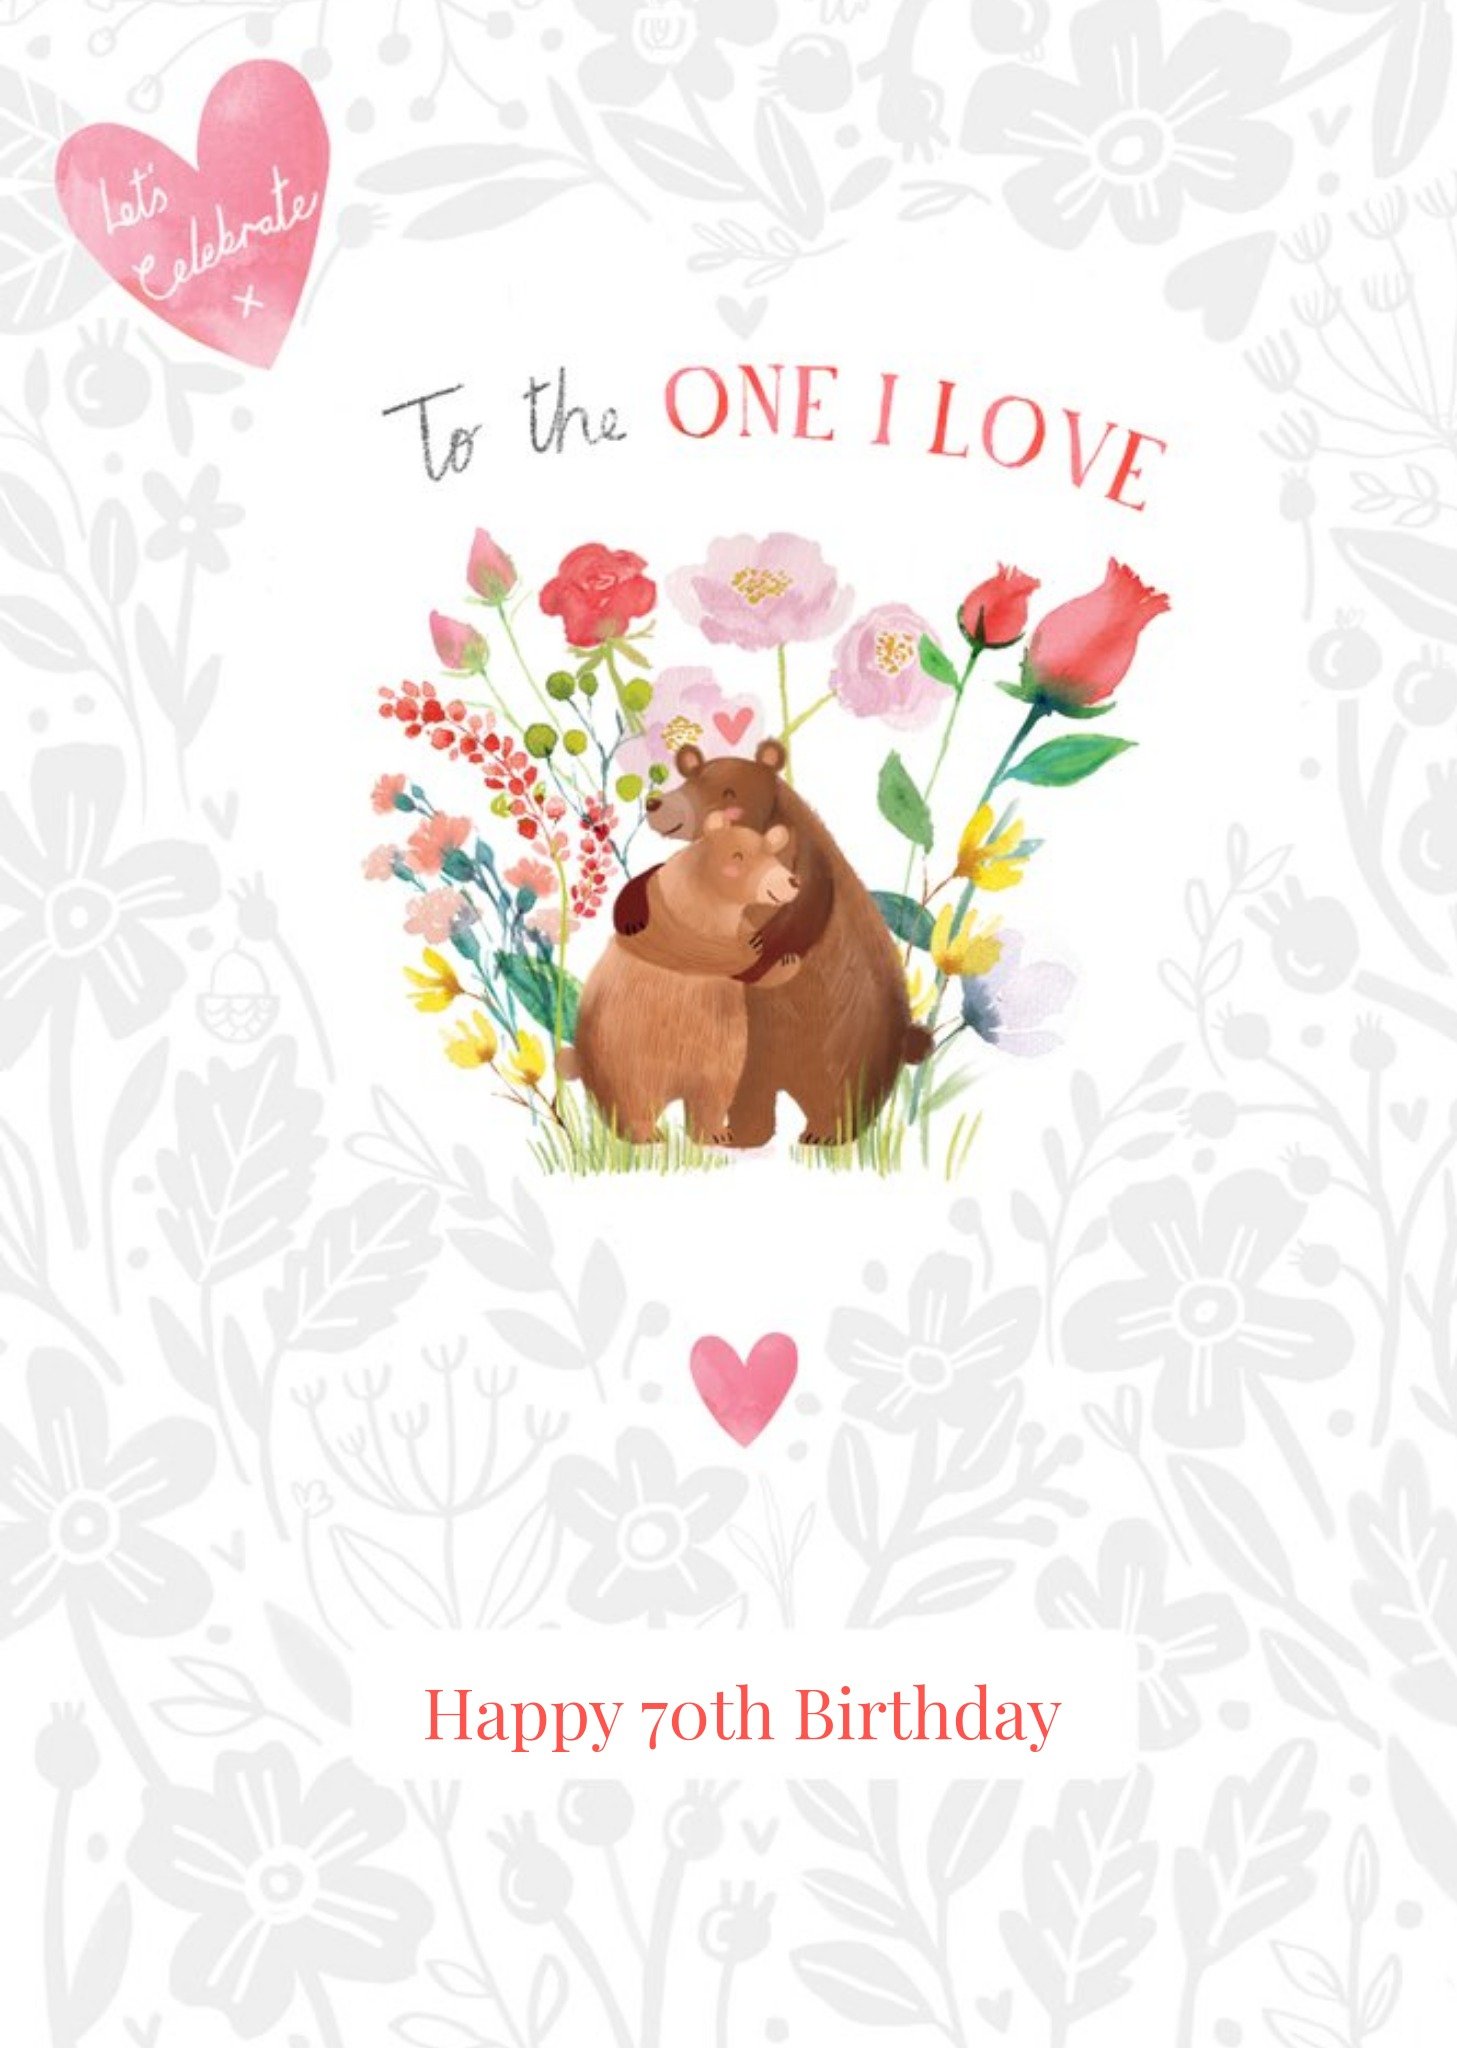 Ling Design Illustrated Hugging Bears Floral One I Love 70th Birthday Card Ecard